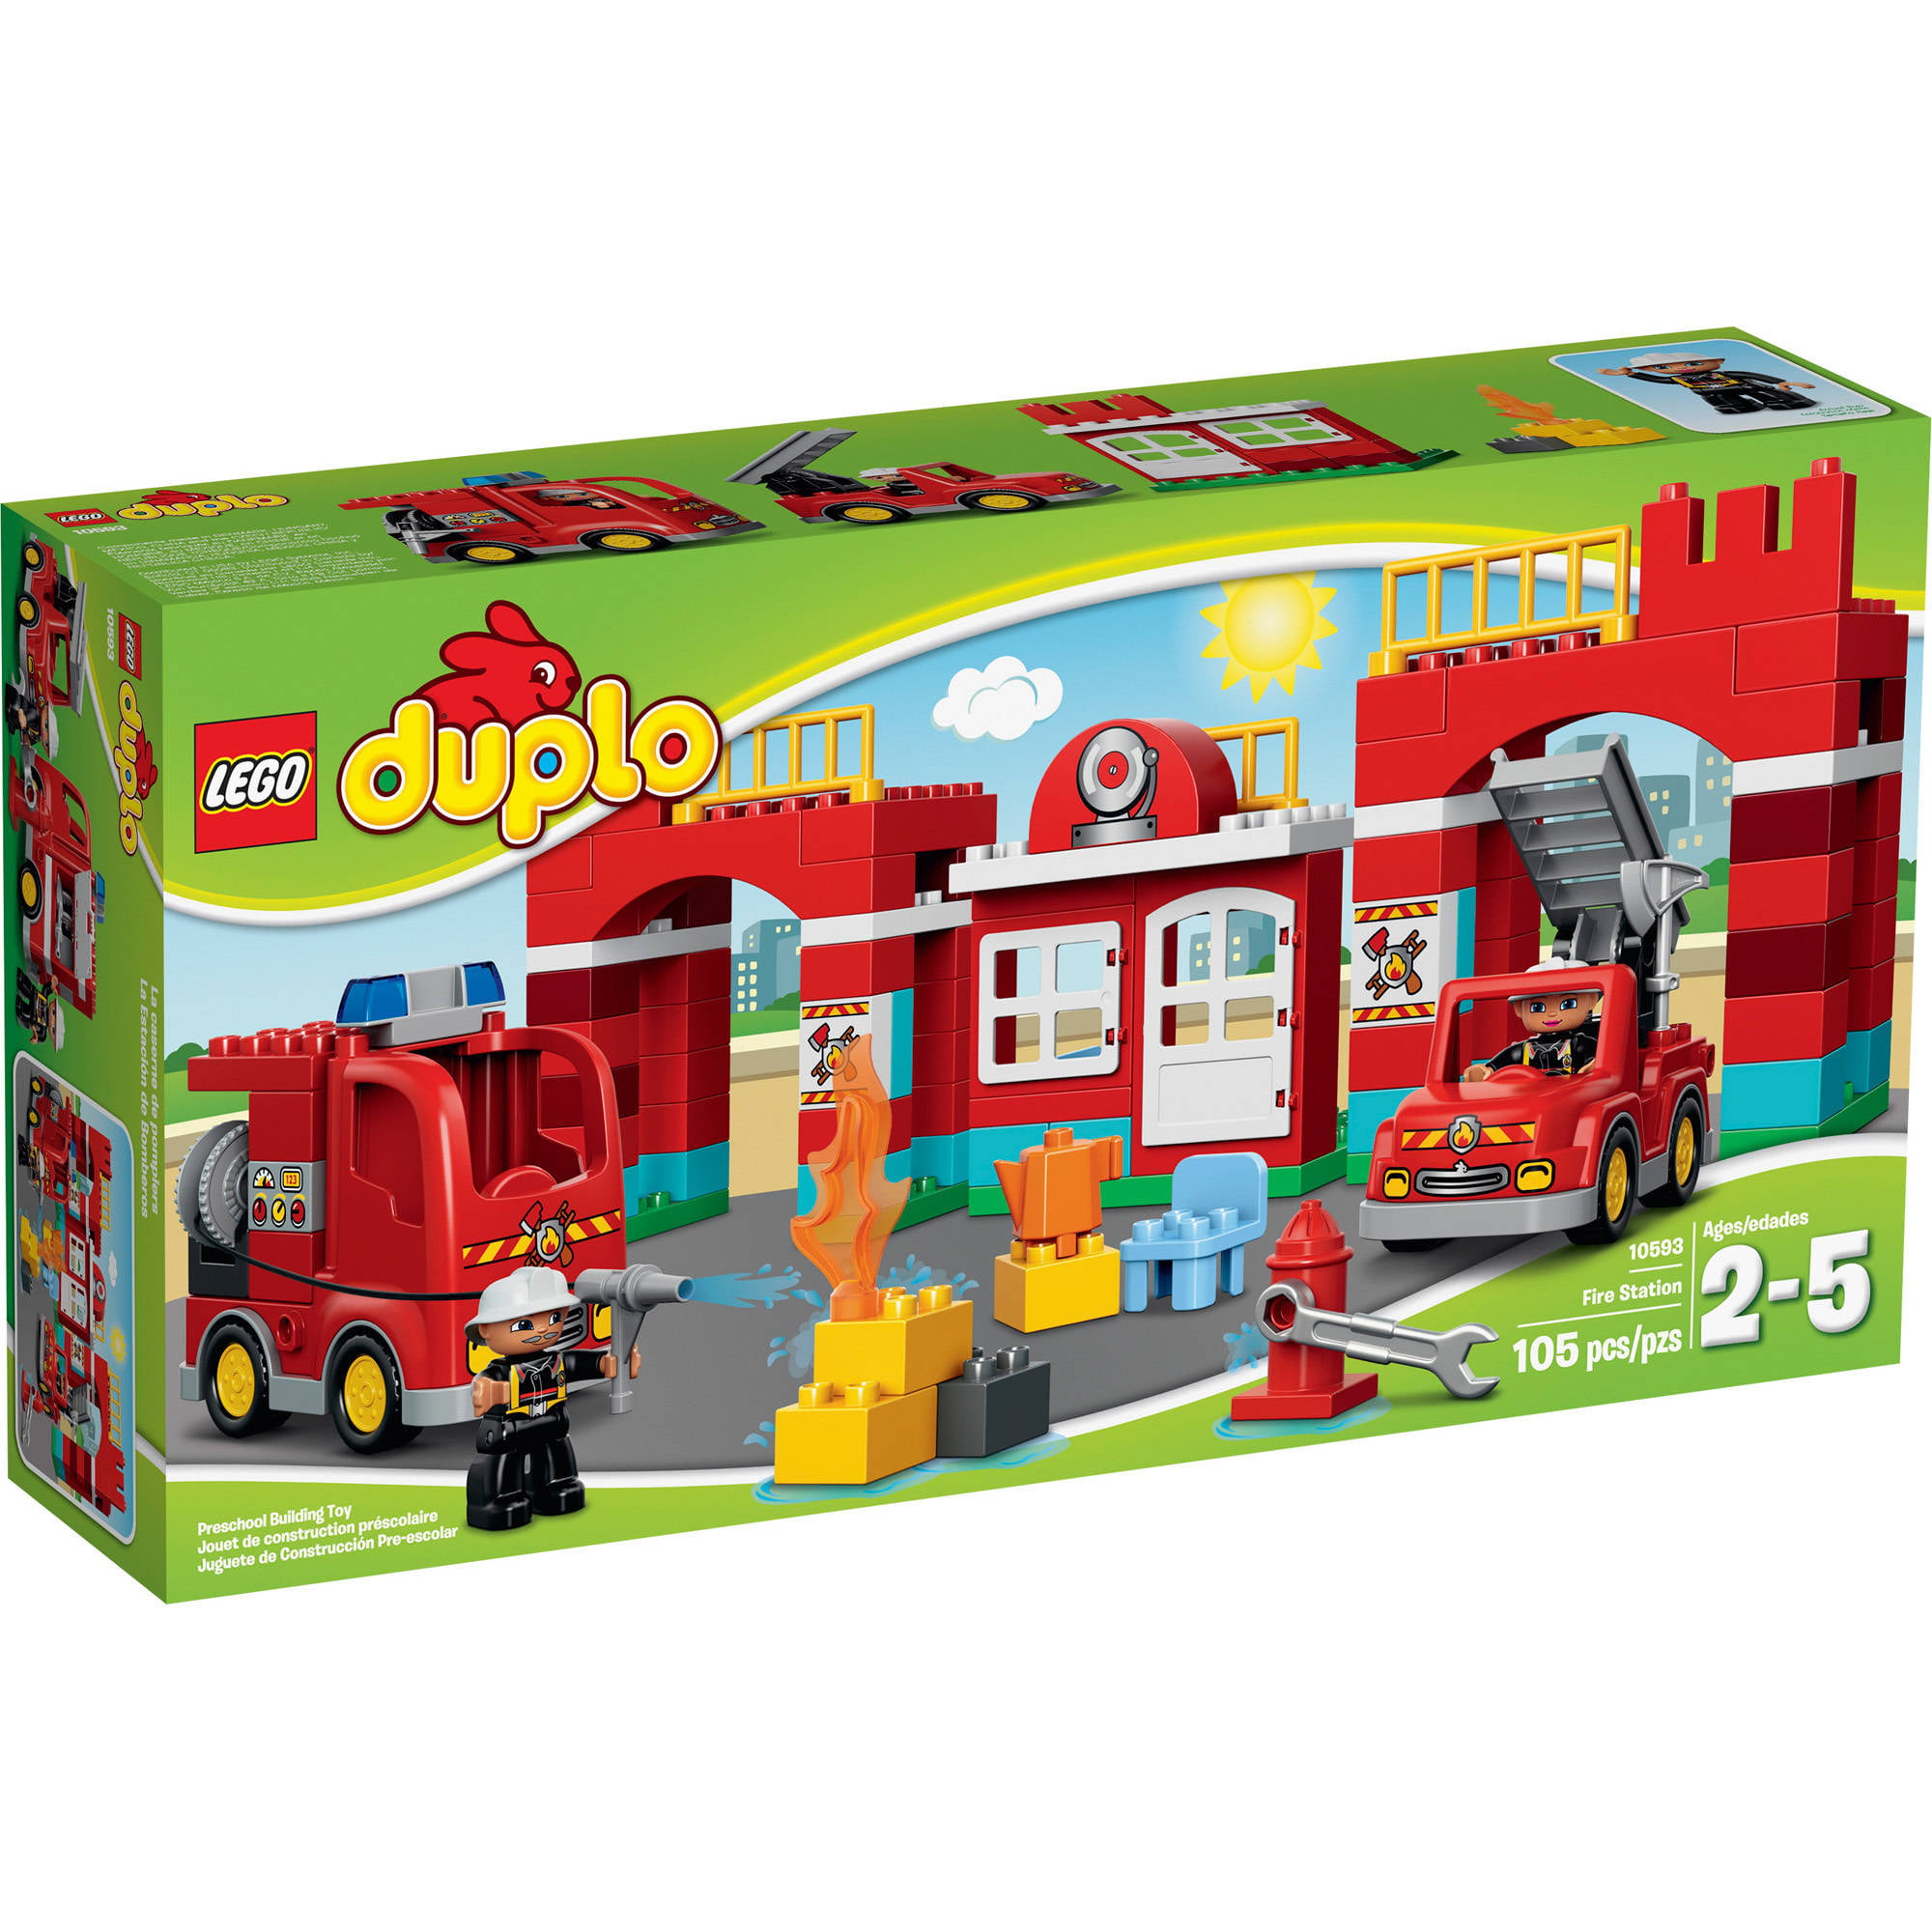 guitar Approval leather LEGO DUPLO Town Fire Station, 10593 - Walmart.com